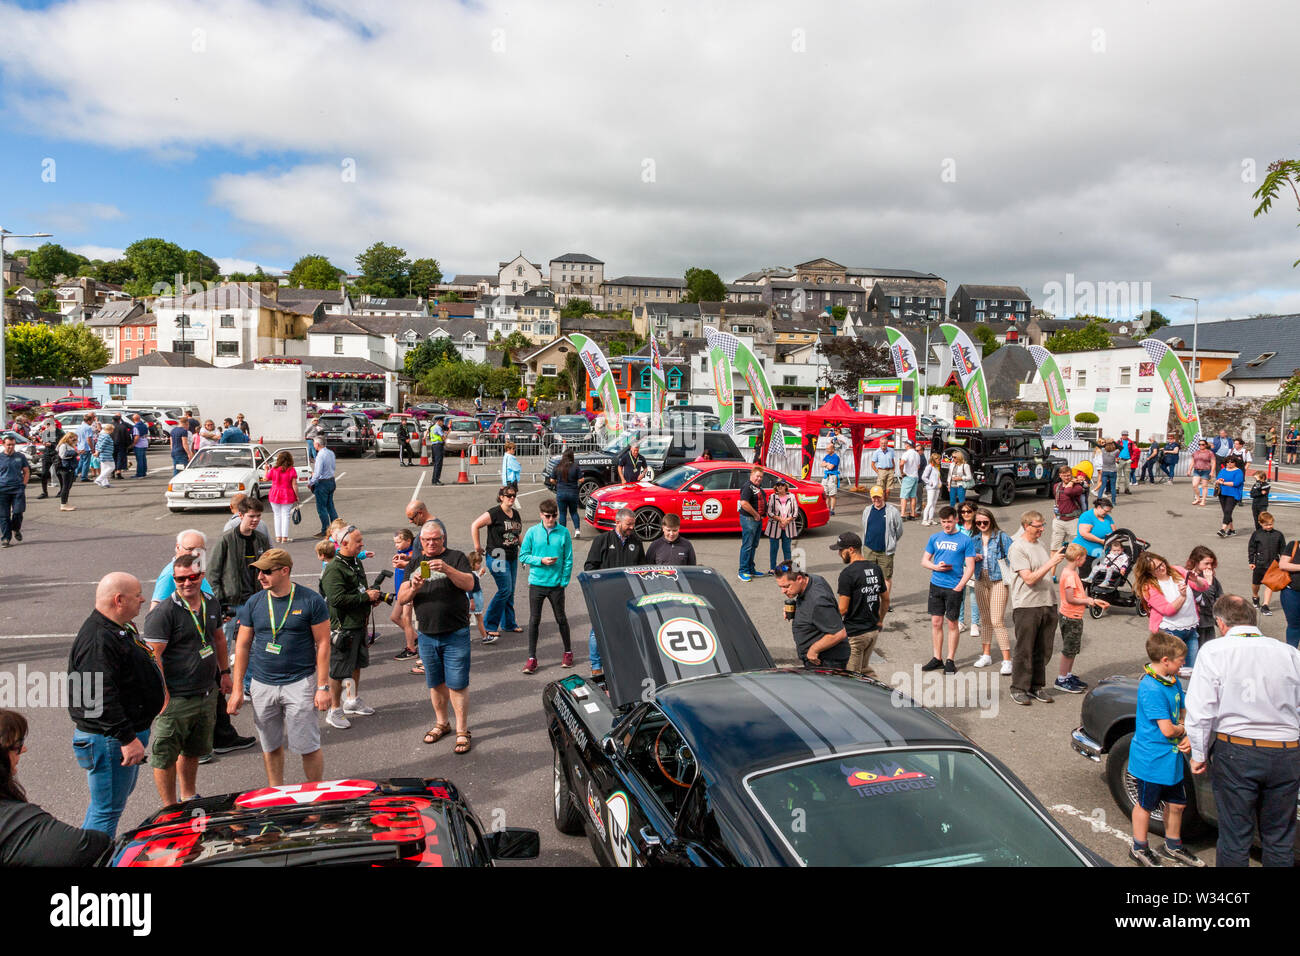 Kinsale, Cork, Ireland. 12th July, 2019. A section of the crowd at the starting line of the Cannononball Retro Road Trip in Kinsale, Co. Cork, Ireland. The classic run starts in Kinsale and takes in Healy Pass, Kenmare, Molls Gap, Inch Beach, Dingle, Slea Head, Conor Pass, Tralee and finishes at Bunratty Castle on July 13th 2019. Credit: David Creedon/Alamy Live News Stock Photo